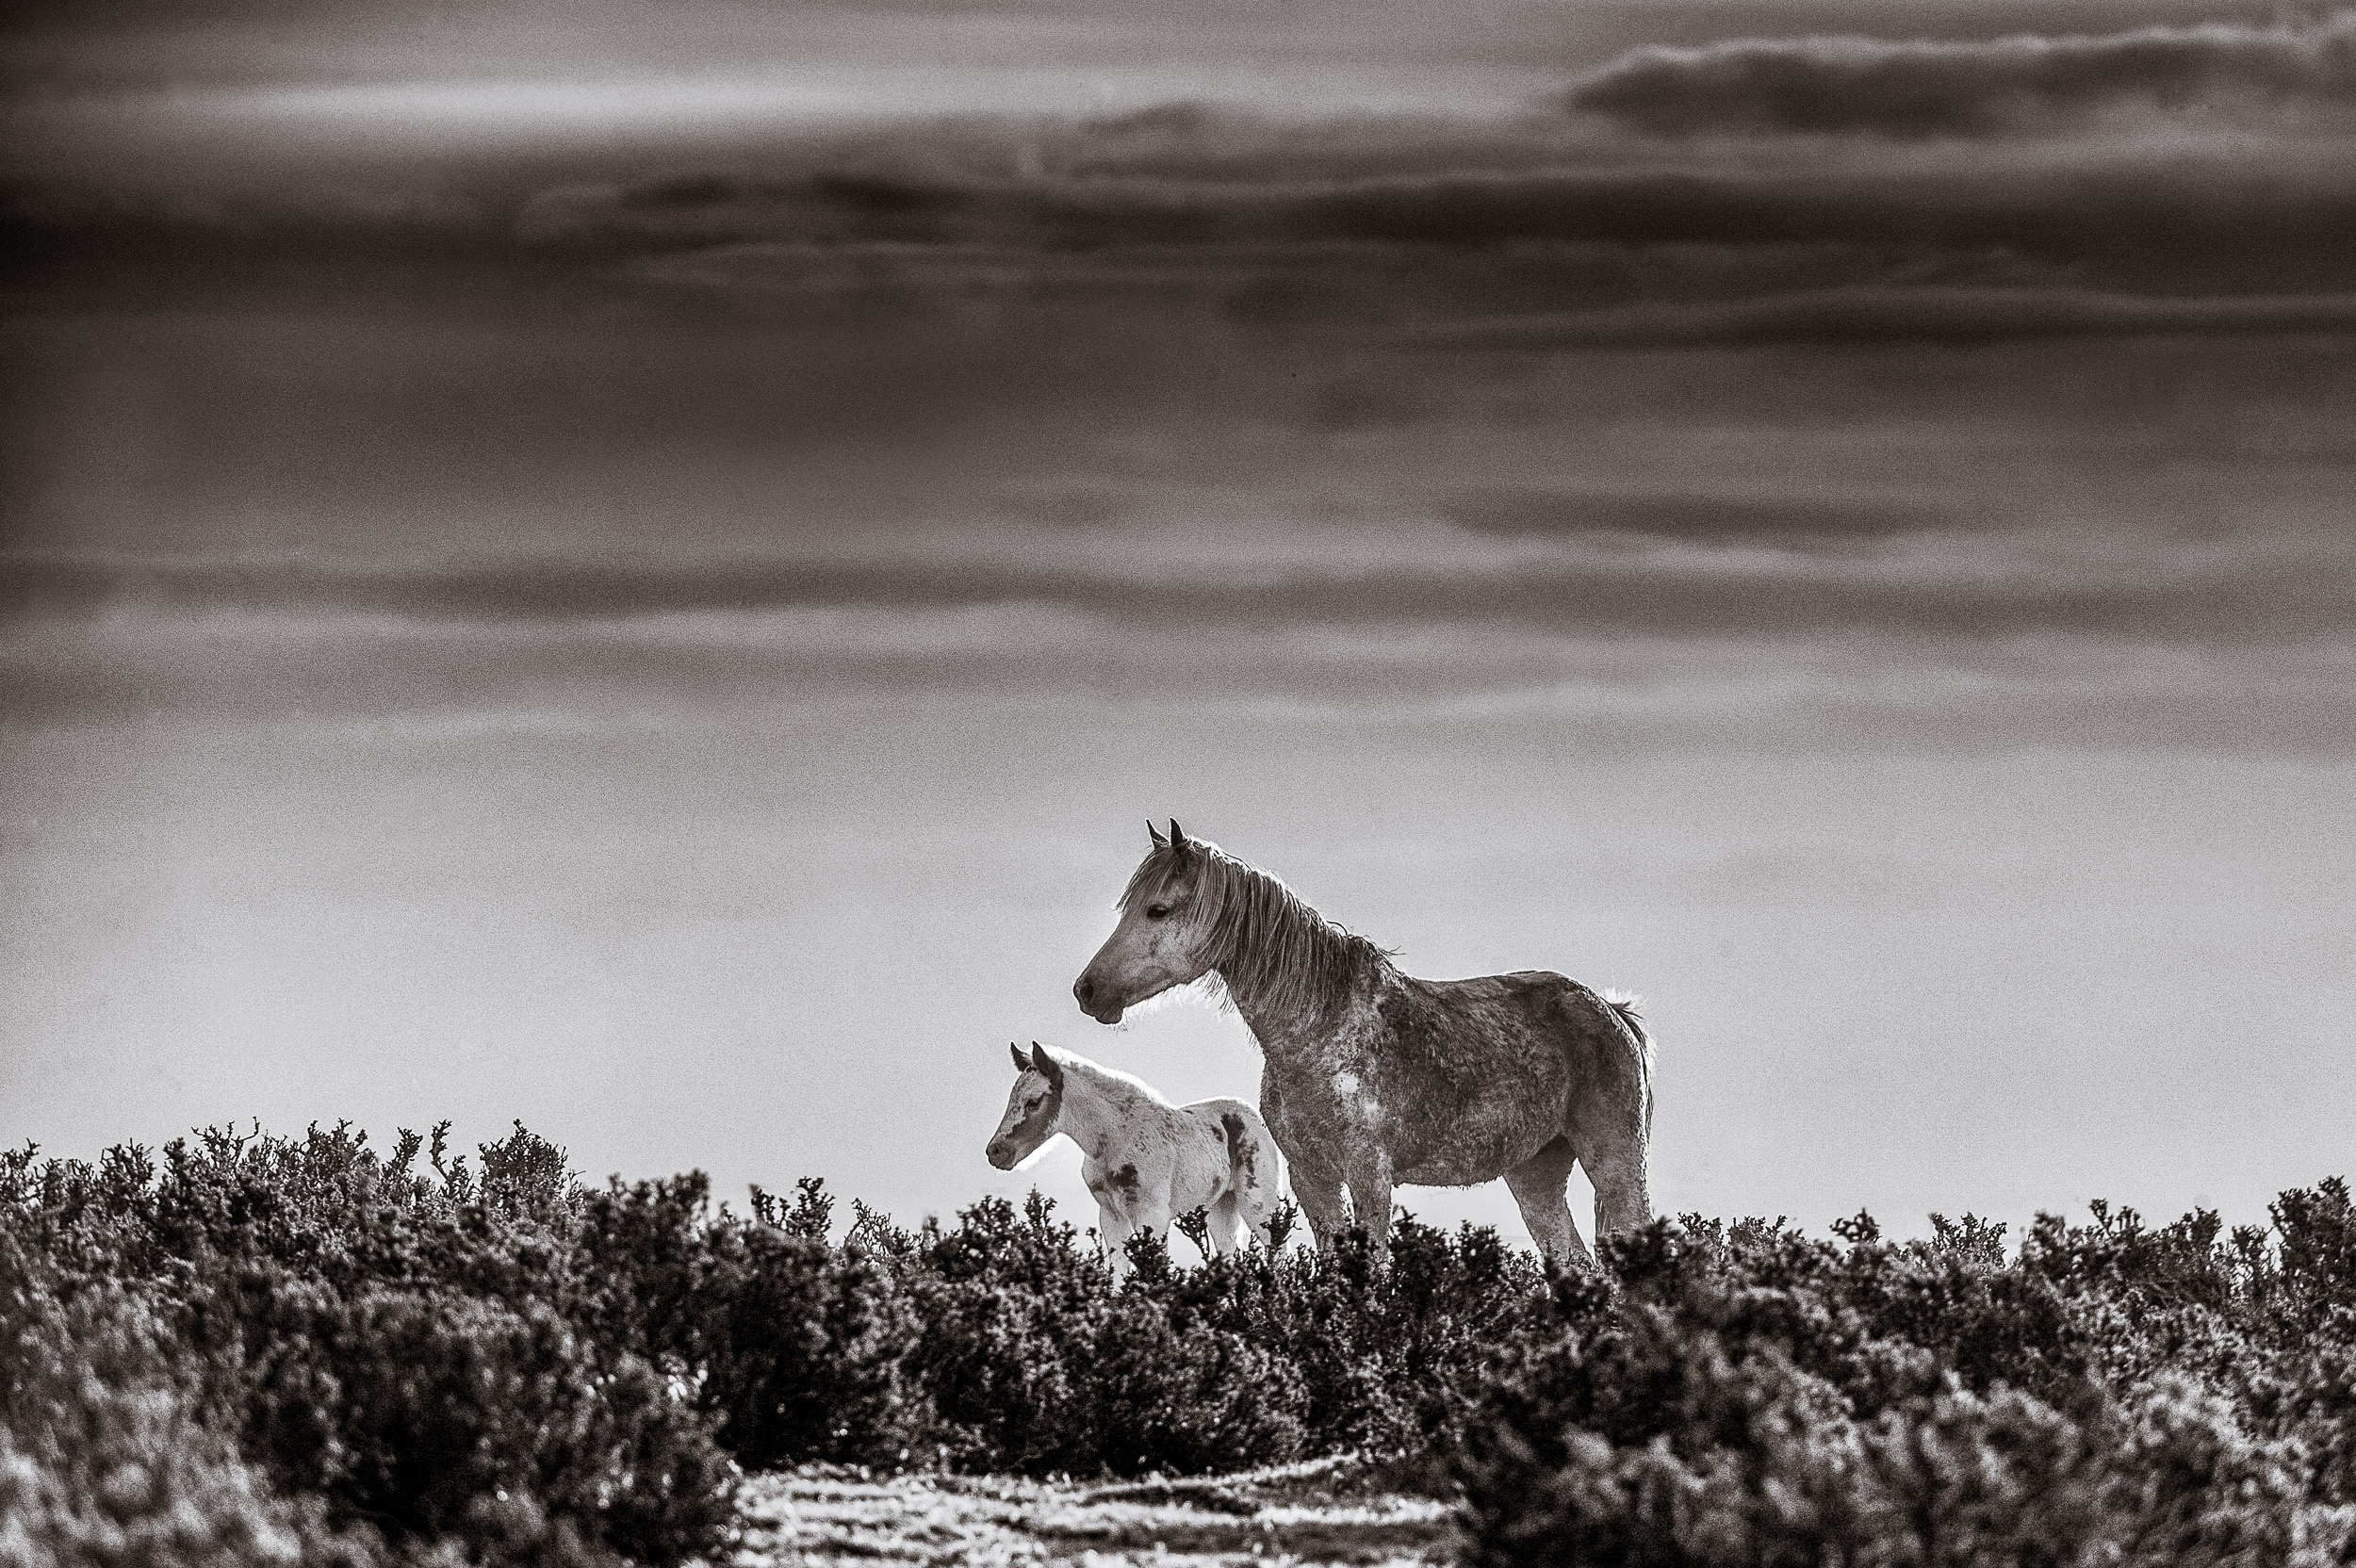 Two wild horses standing amongst the rough bushes of Patagonia